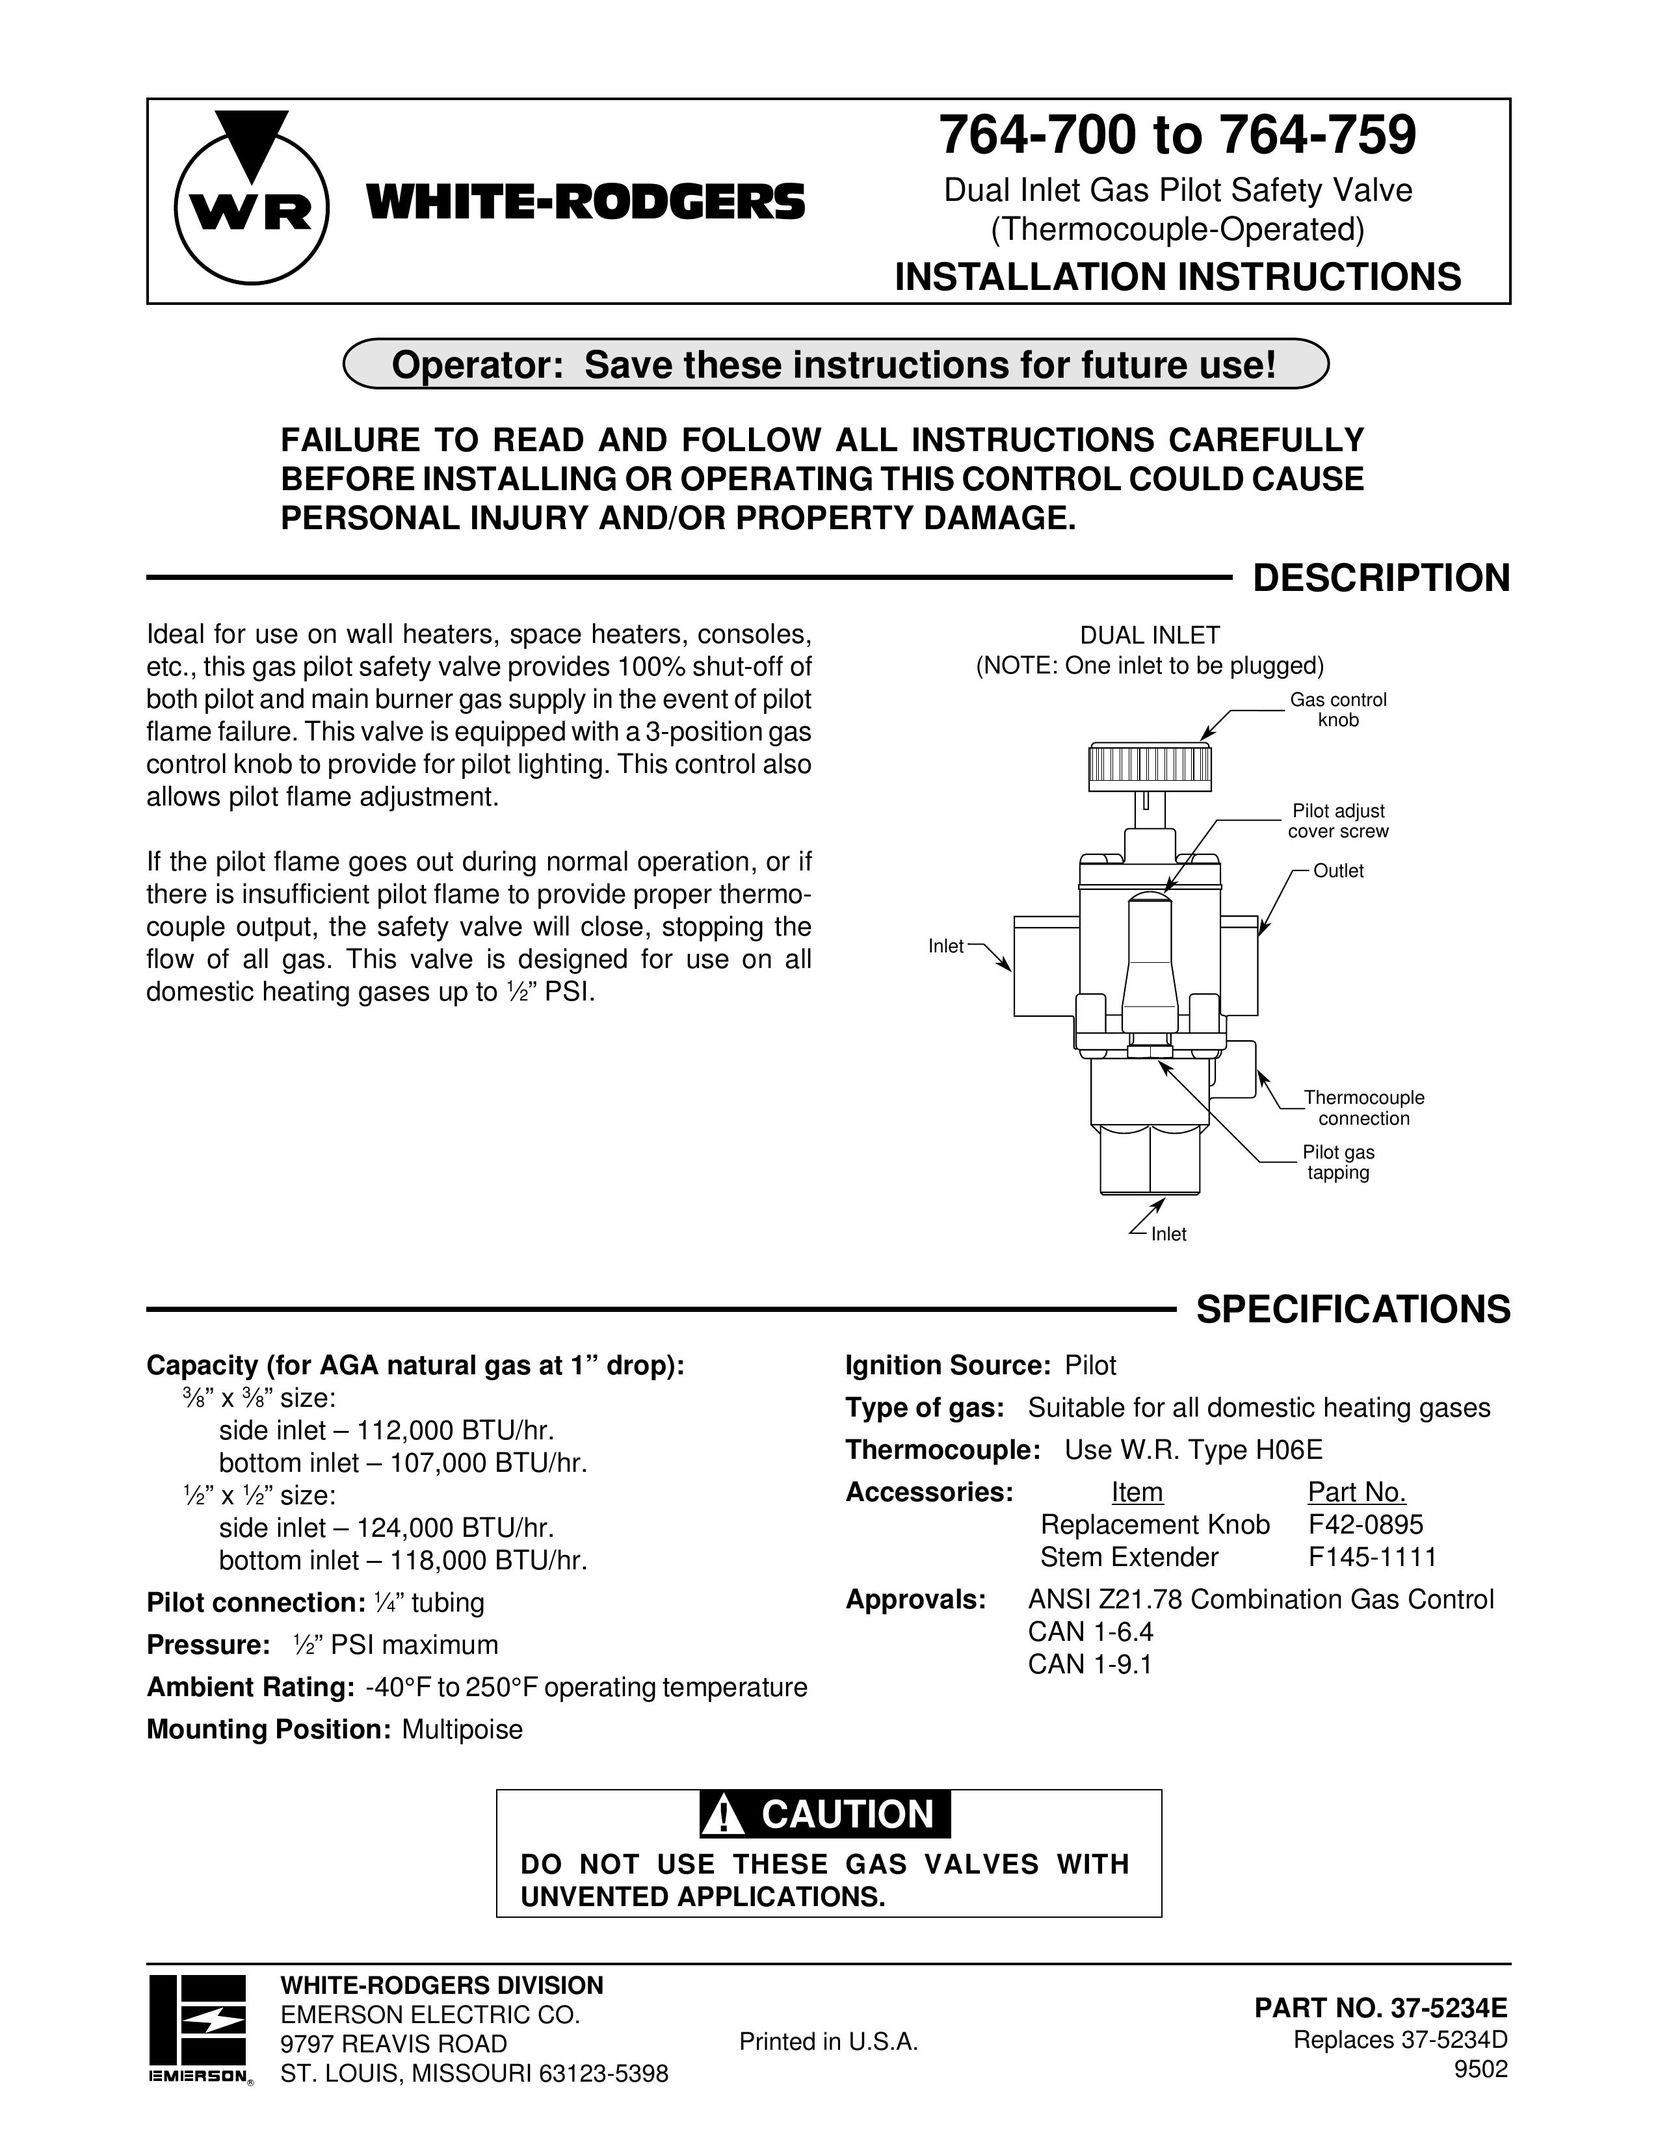 White Rodgers 764-700 Furnace User Manual